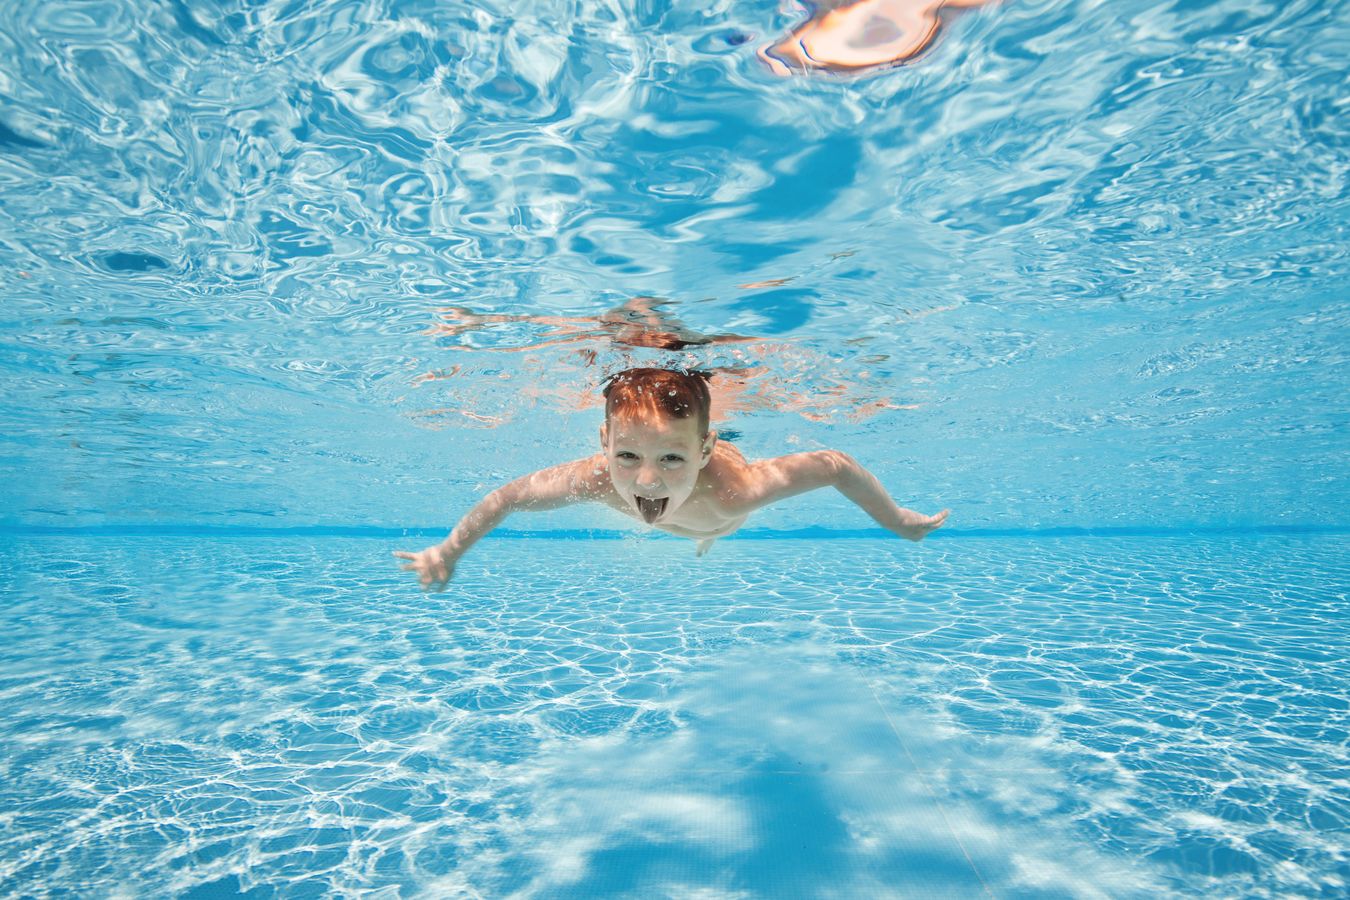 A young boy swimming underwater with his eyes open